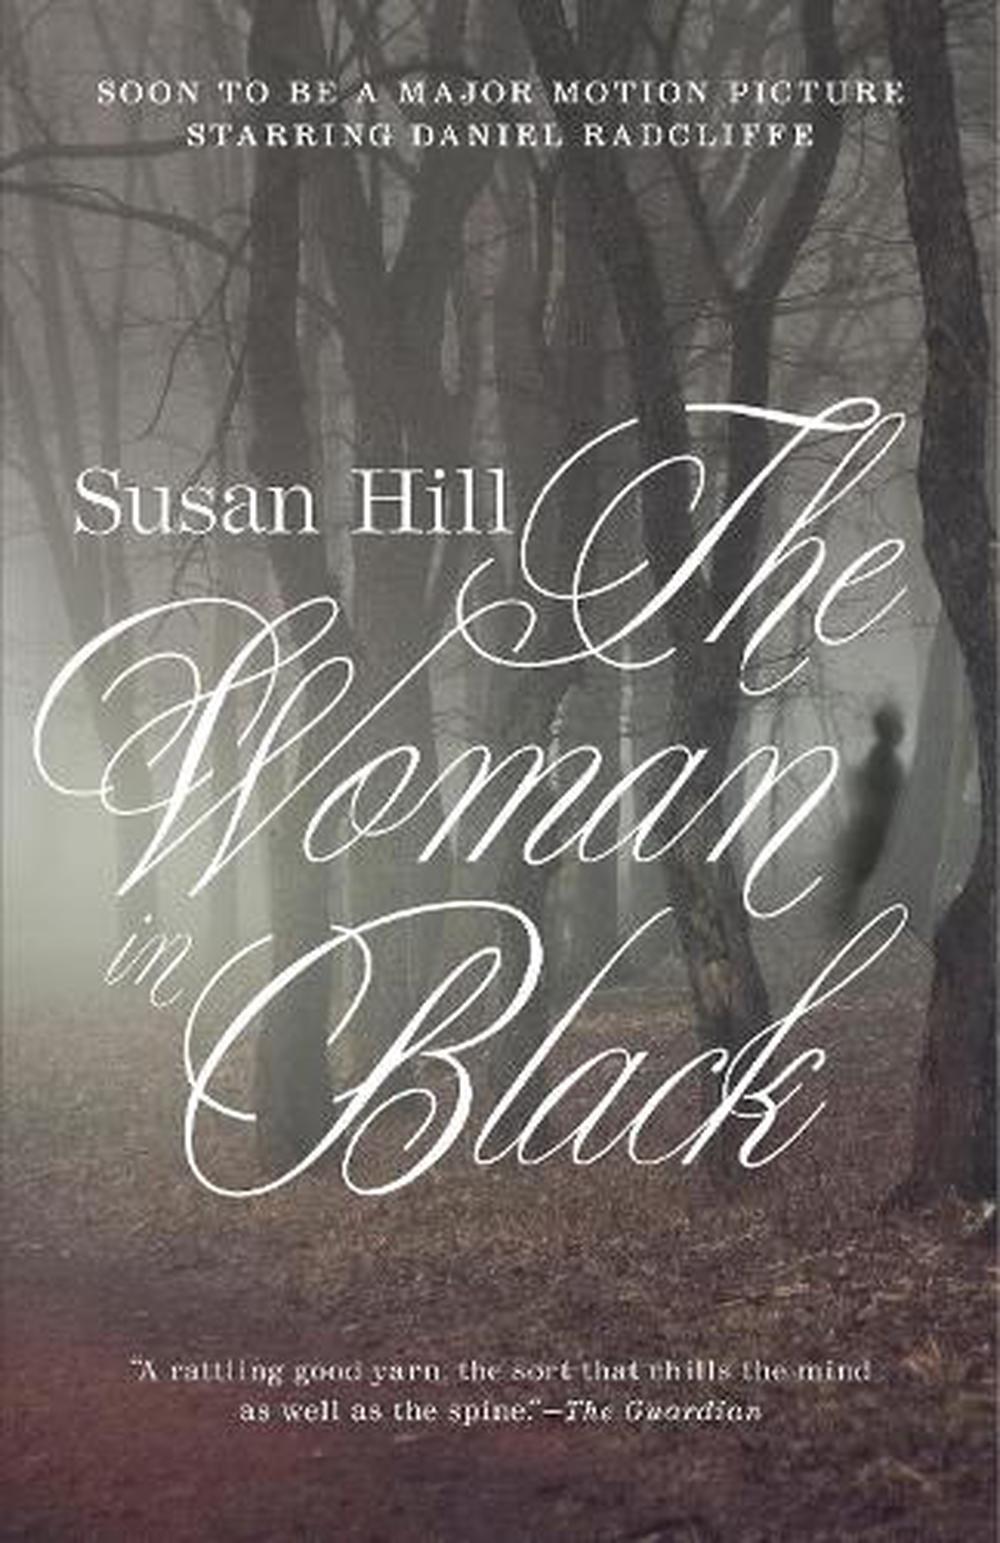 The Woman in Black and Other Ghost Stories by Susan Hill